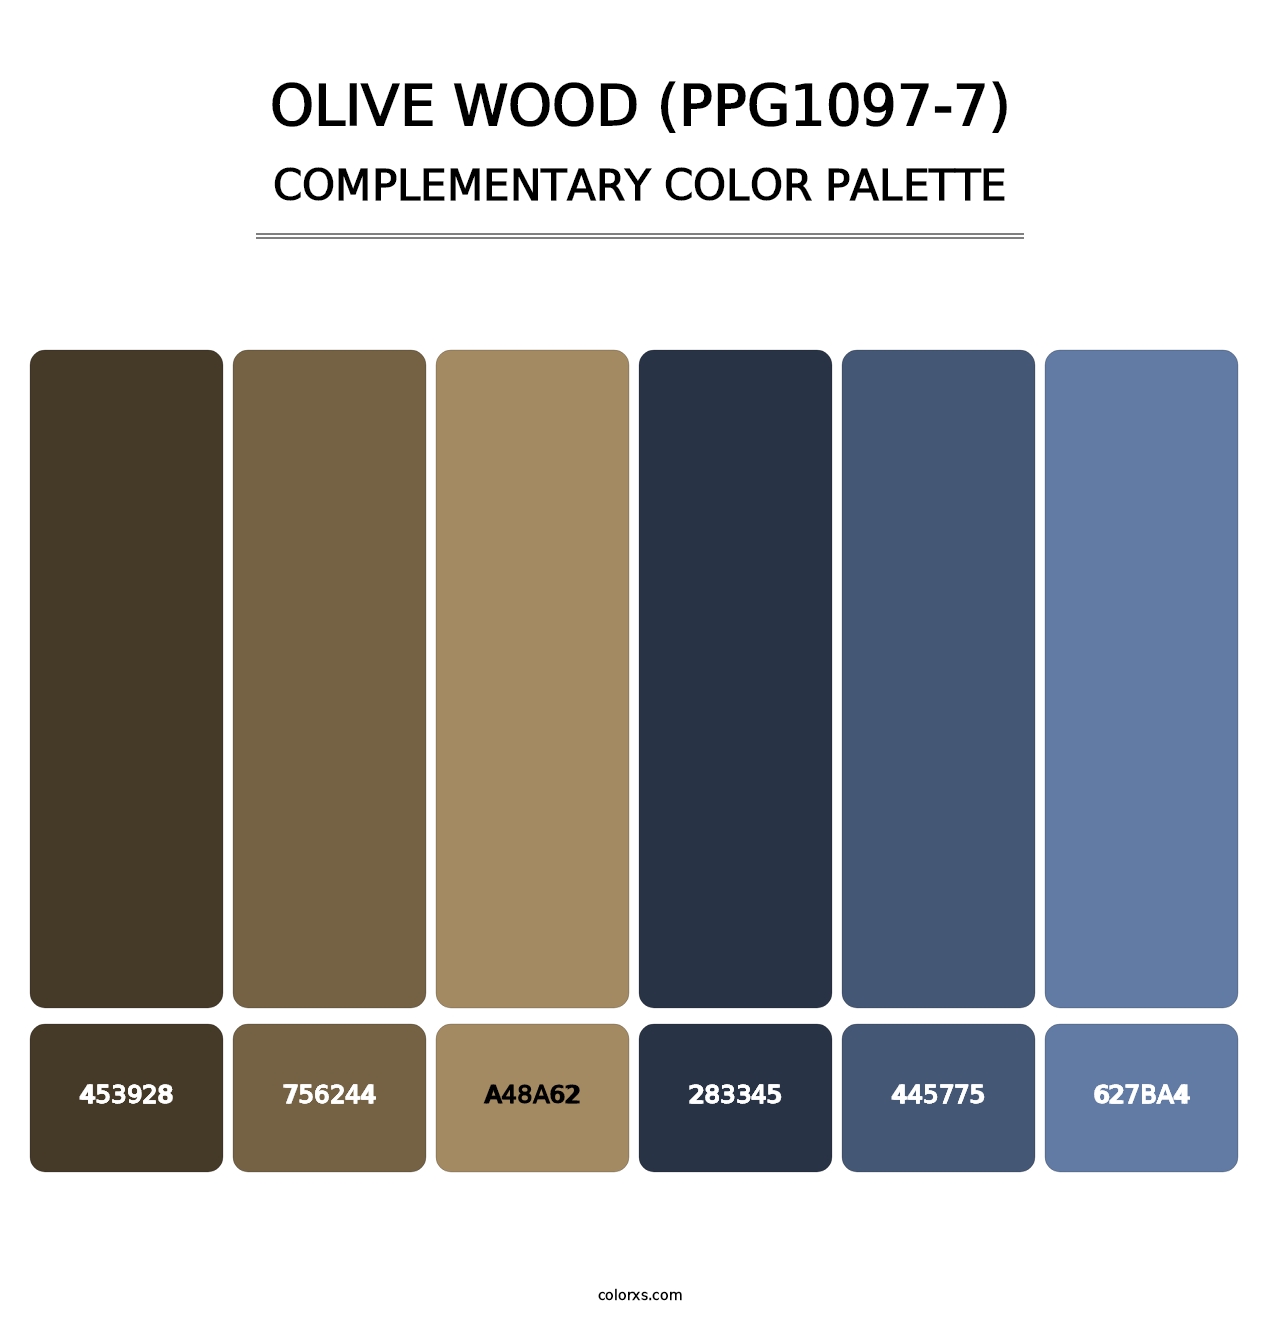 Olive Wood (PPG1097-7) - Complementary Color Palette